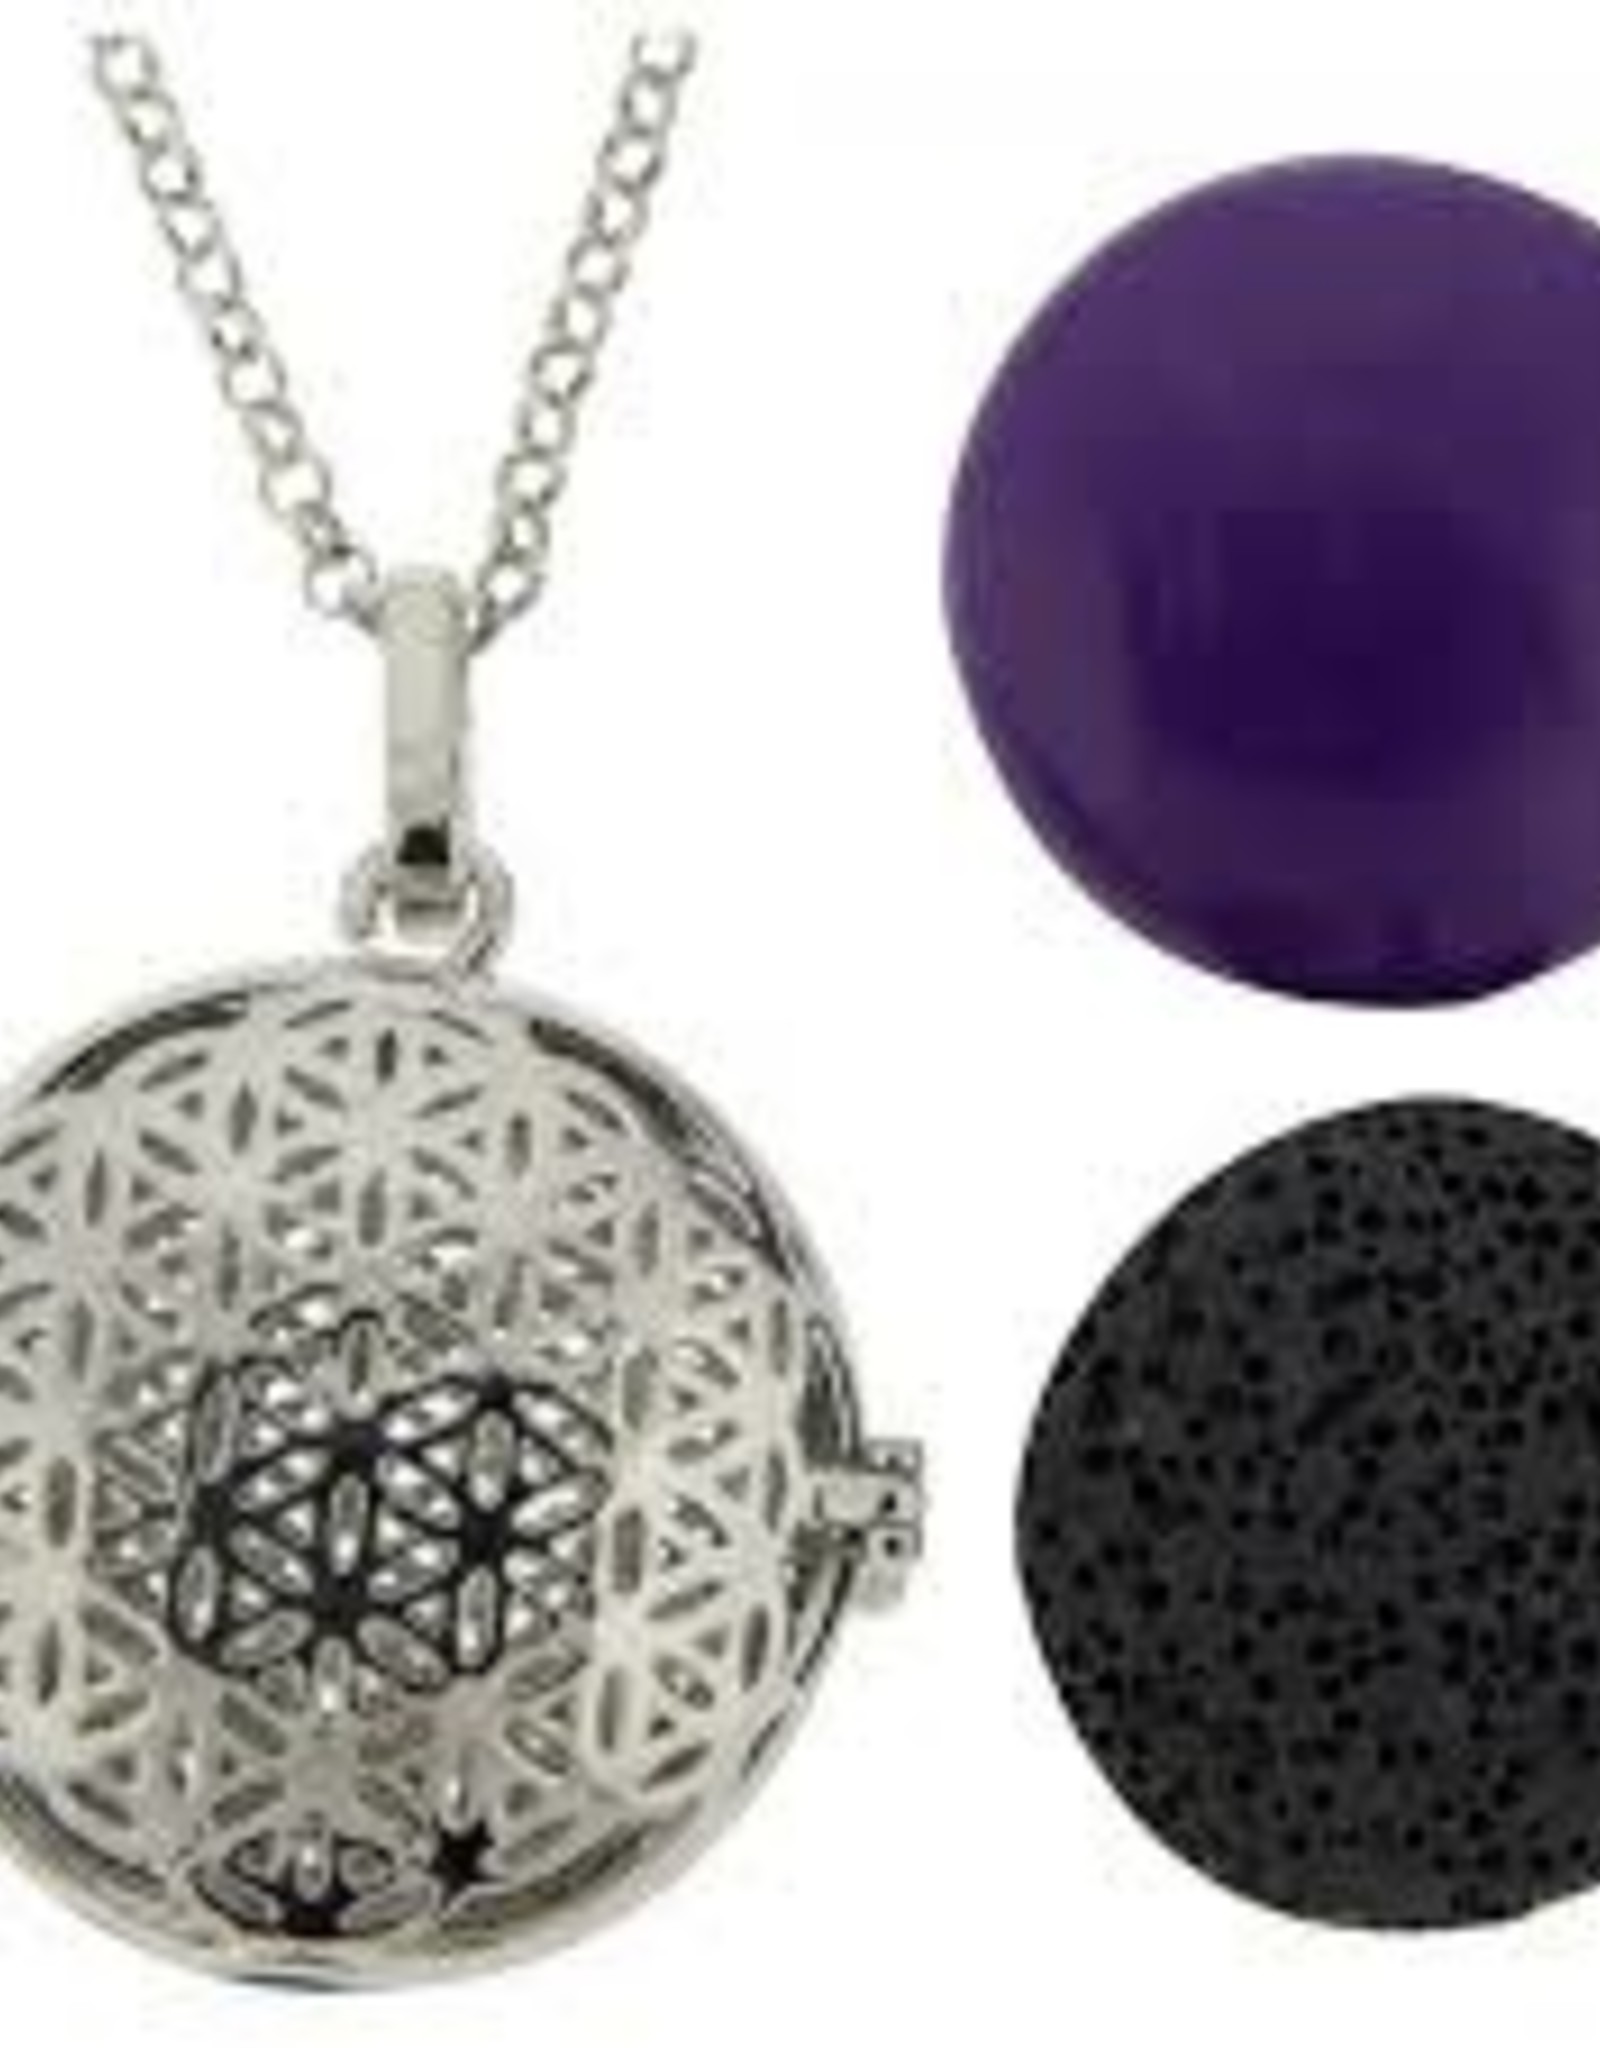 Aromatherapy Pendant-Necklace Flower of Life